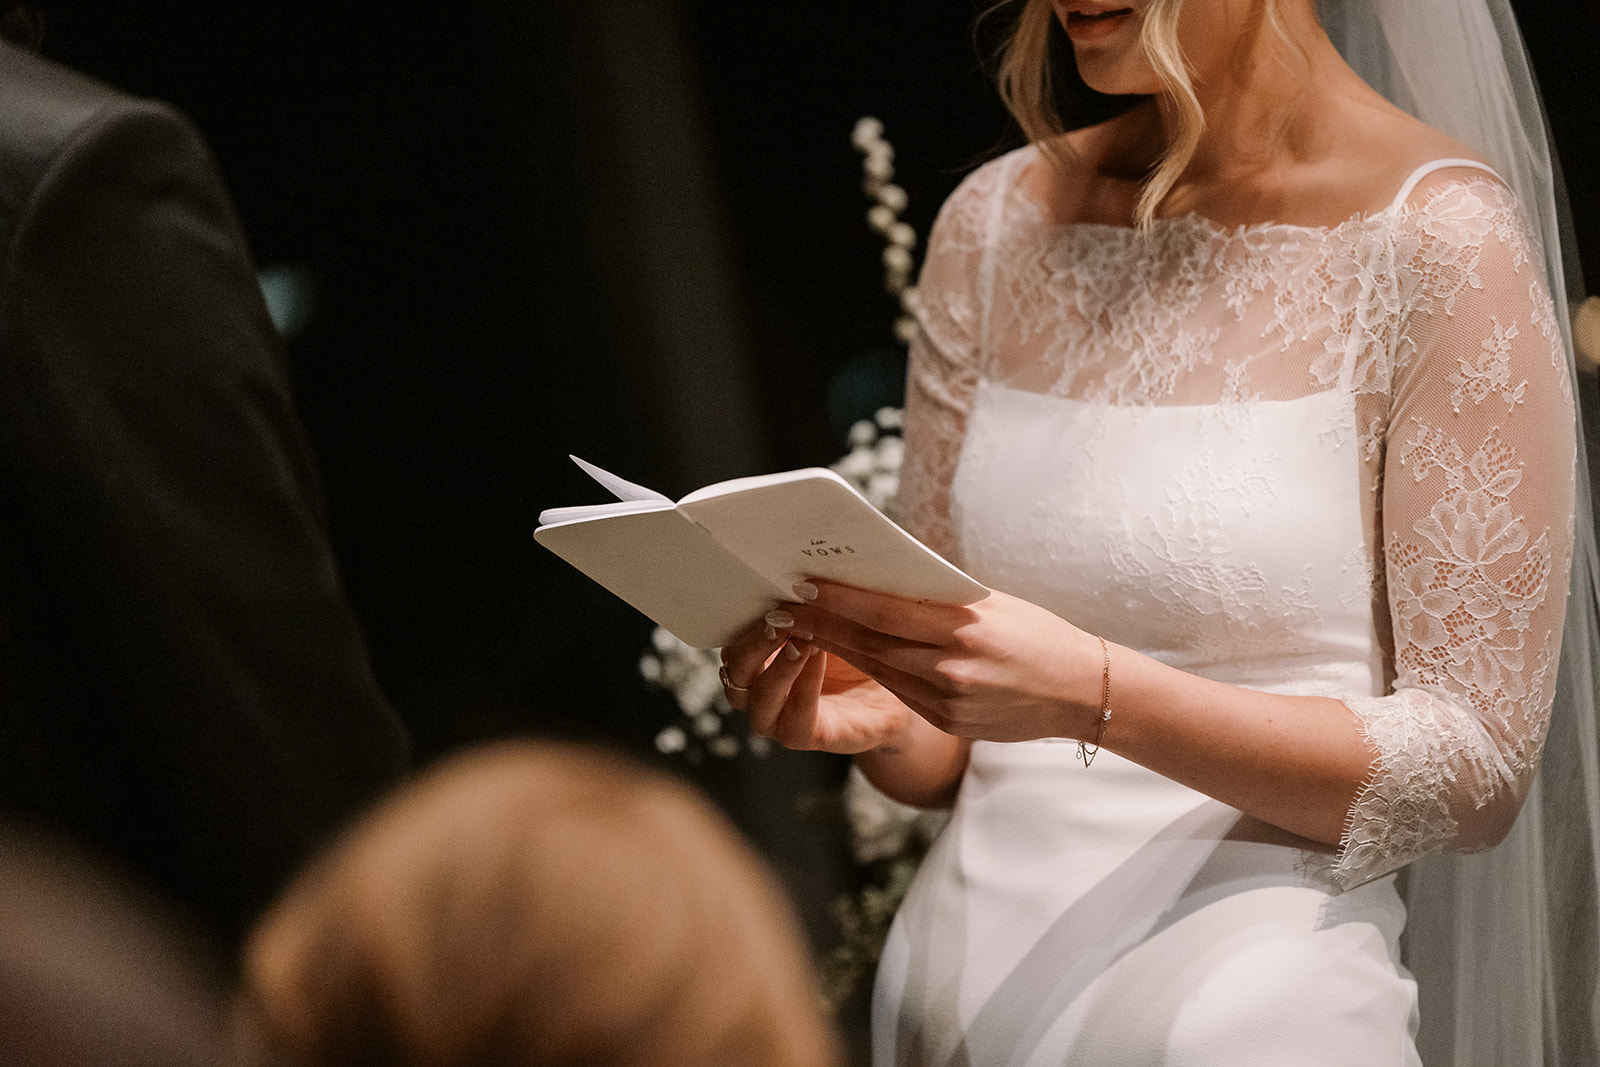 close on bride hold vow book during Canlis wedding ceremony